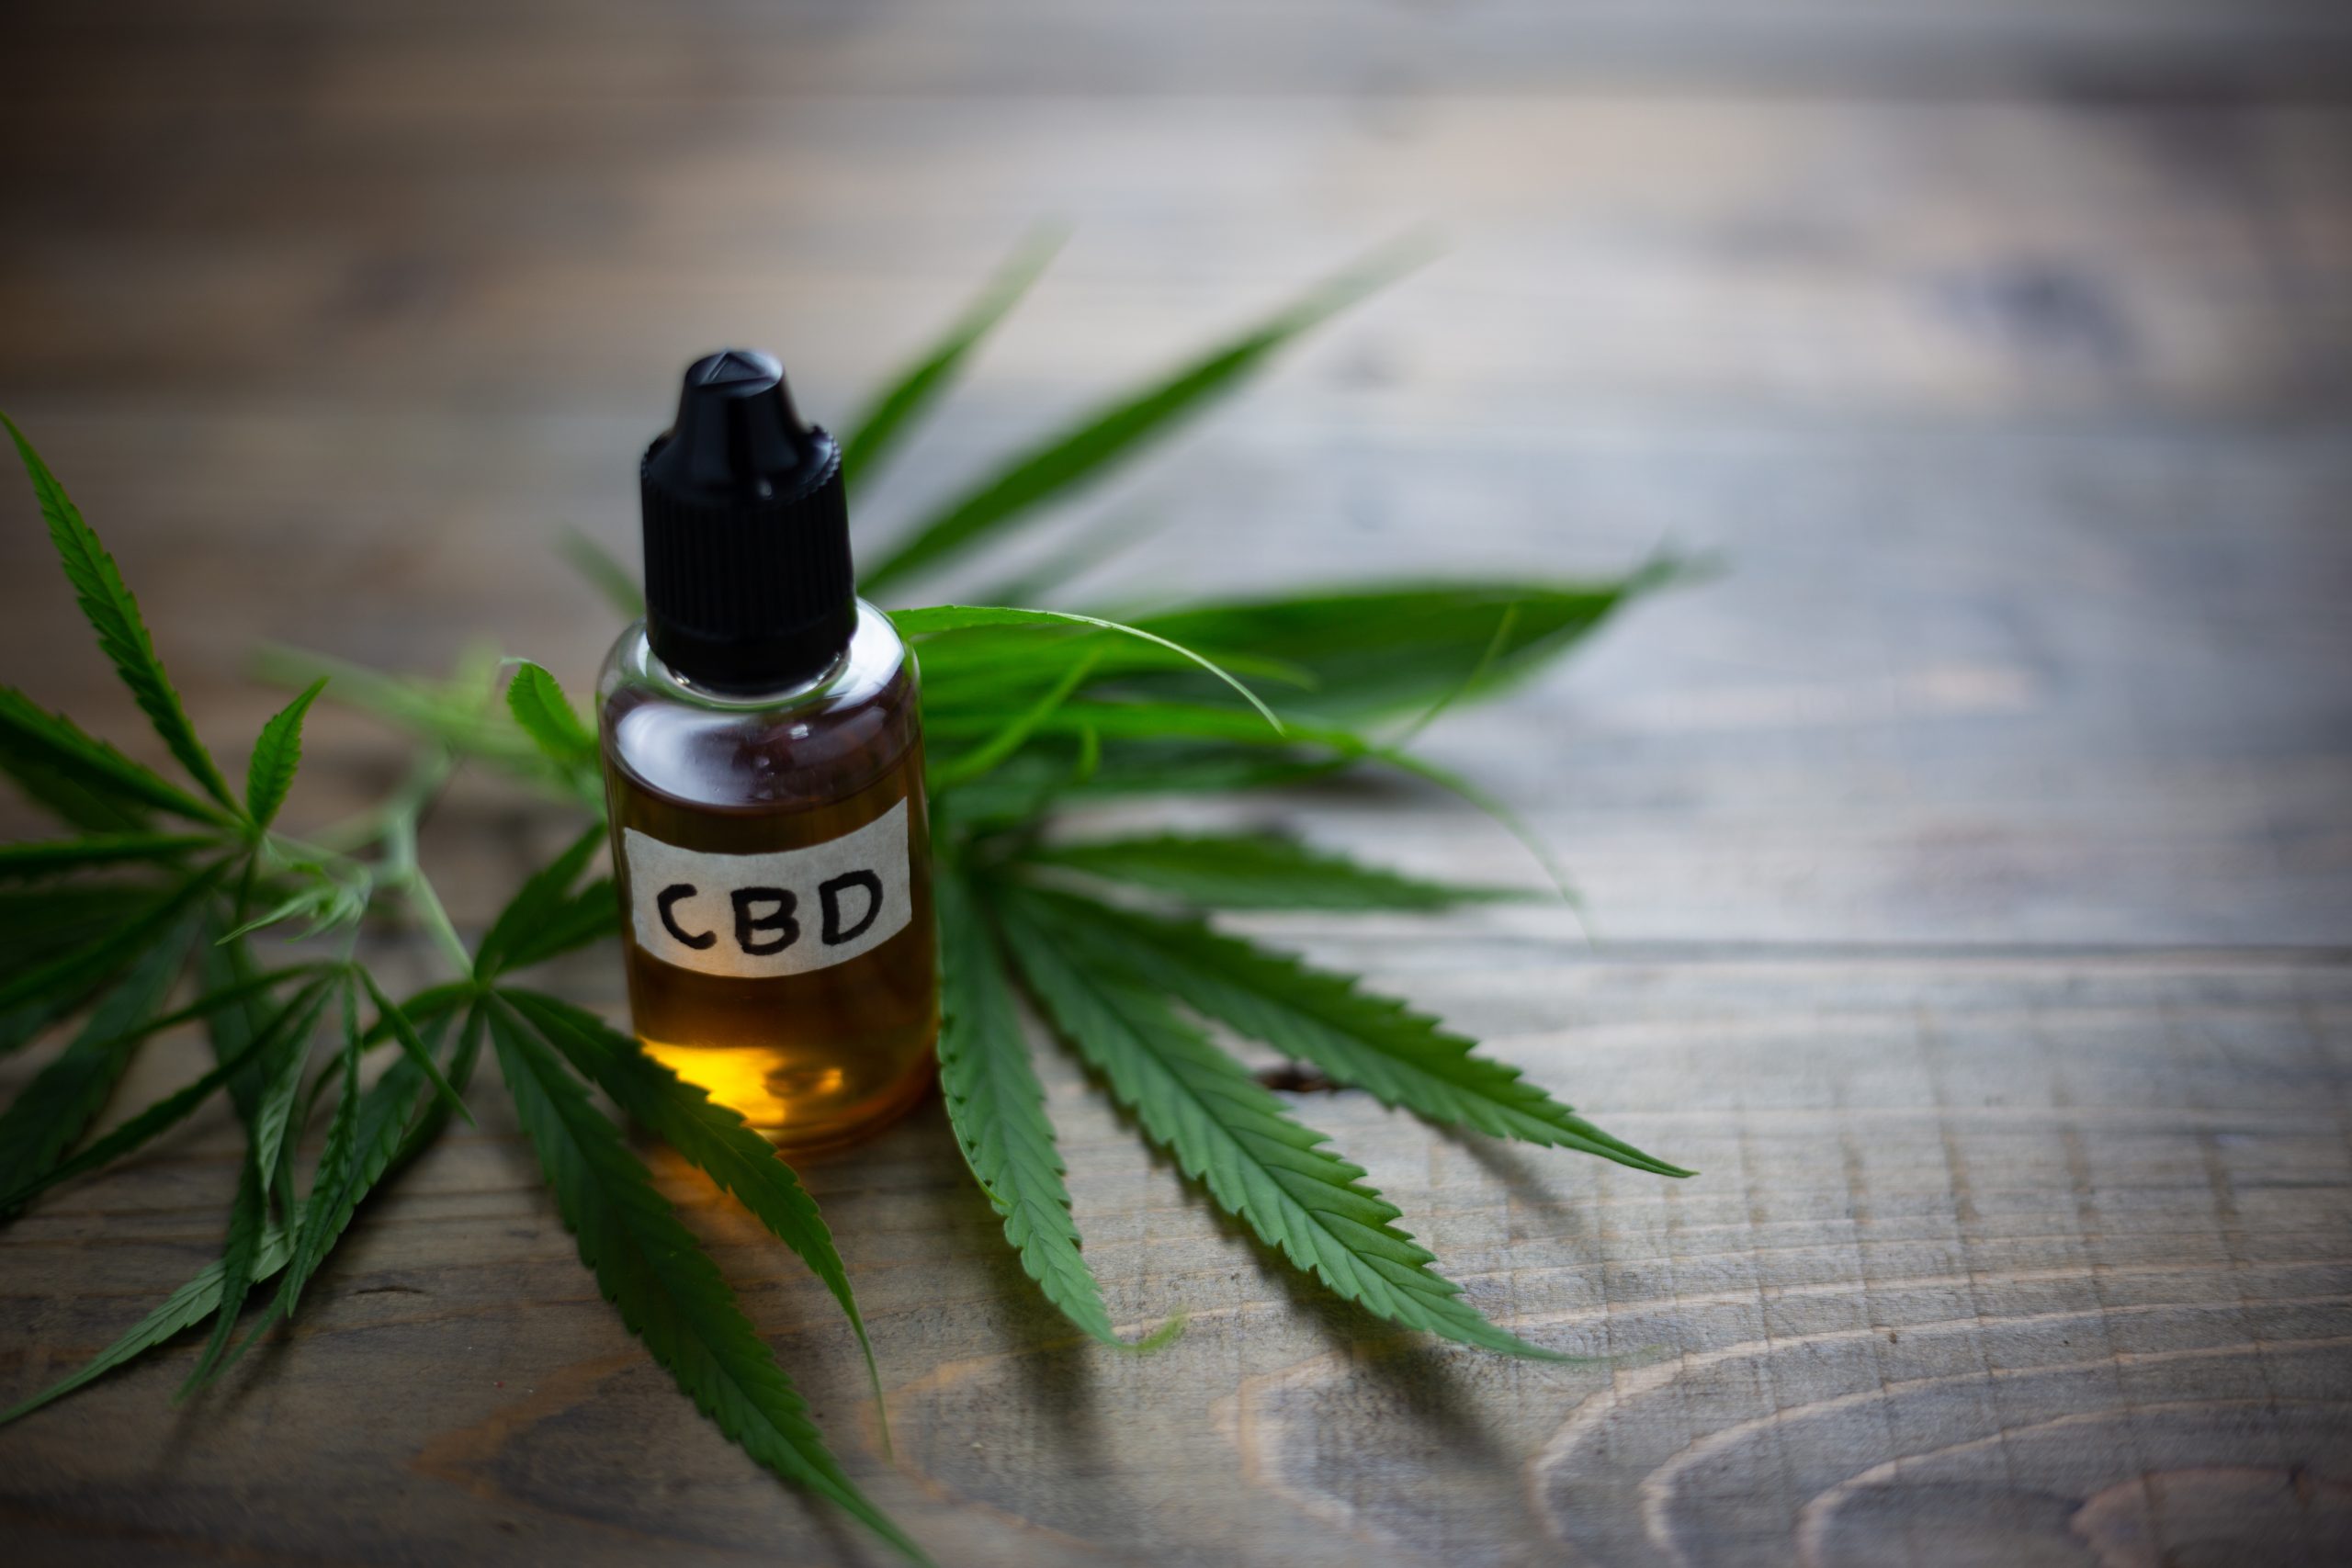 Cbd Oil For Parkinson's: Does It Work? - Medical News Today in Jurupa-Valley-California thumbnail